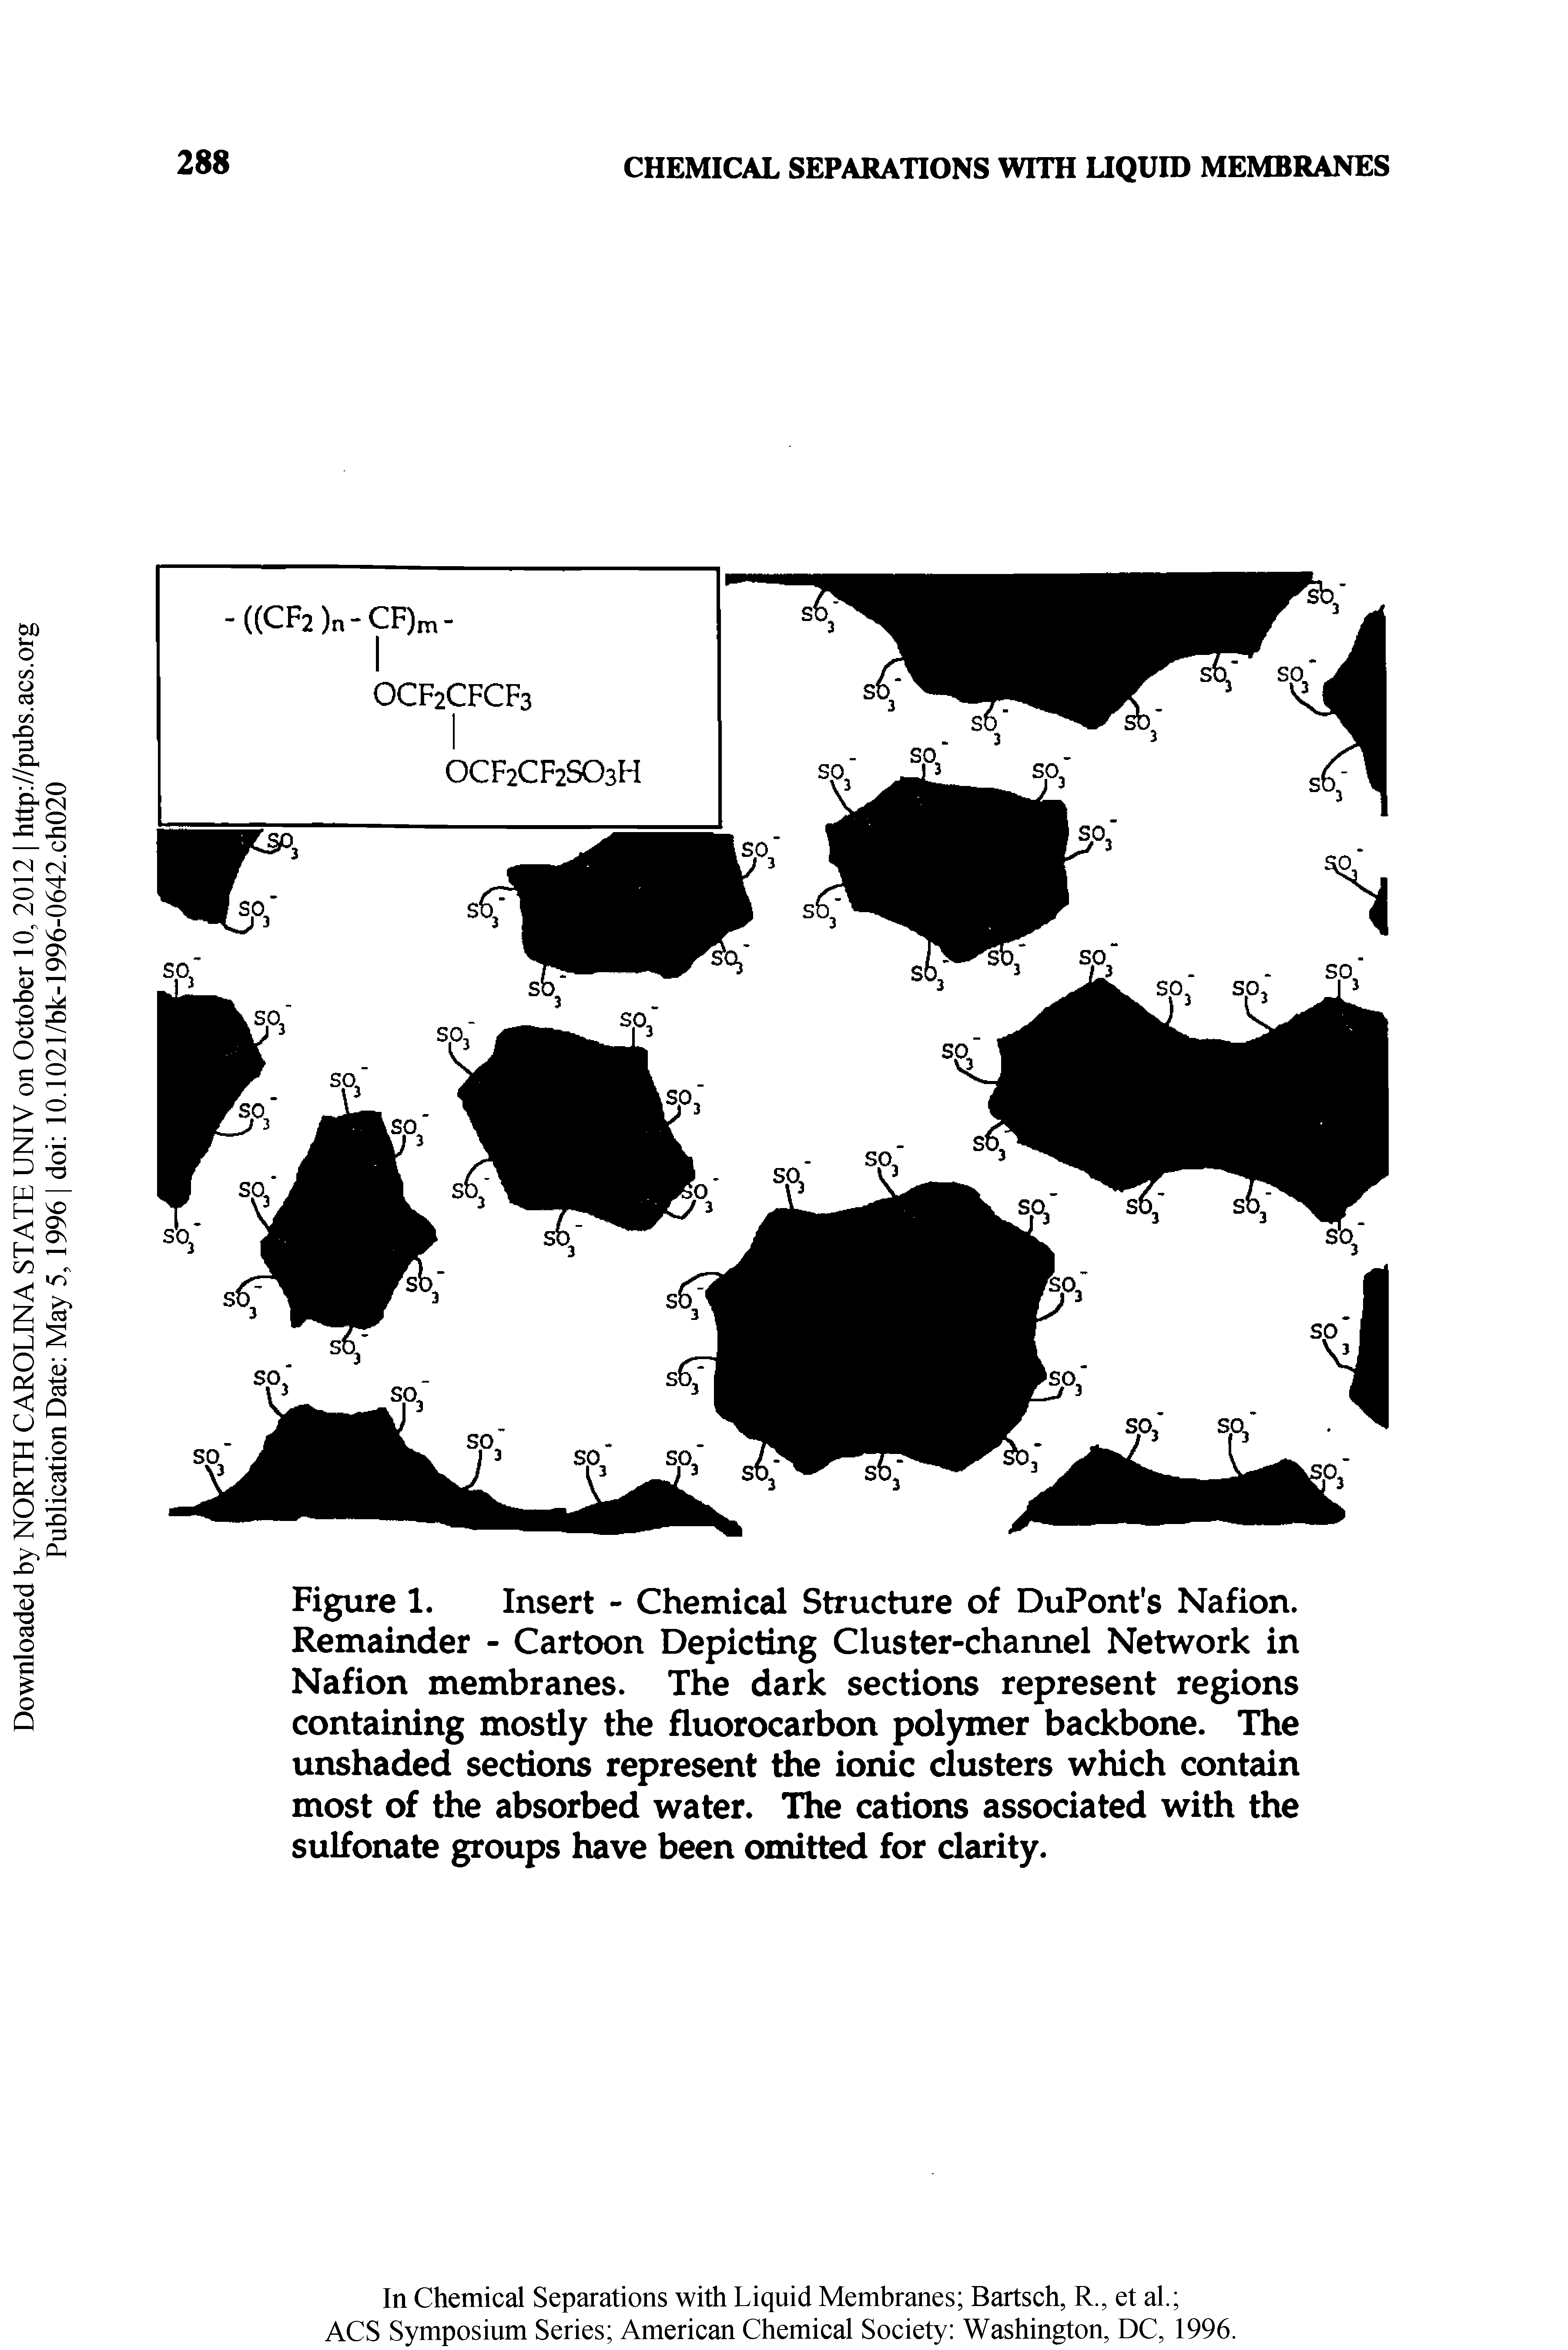 Figure 1. Insert - Chemical Structure of DuPont s Nation. Remainder - Cartoon Depicting Cluster-channel Network in Nation membranes. The dark sections represent regions containing mostly the fluorocarbon polymer backbone. The unshaded sections represent the ionic clusters which contain most of the absorbed water. The cations associated with the sulfonate groups have been omitted for clarity.